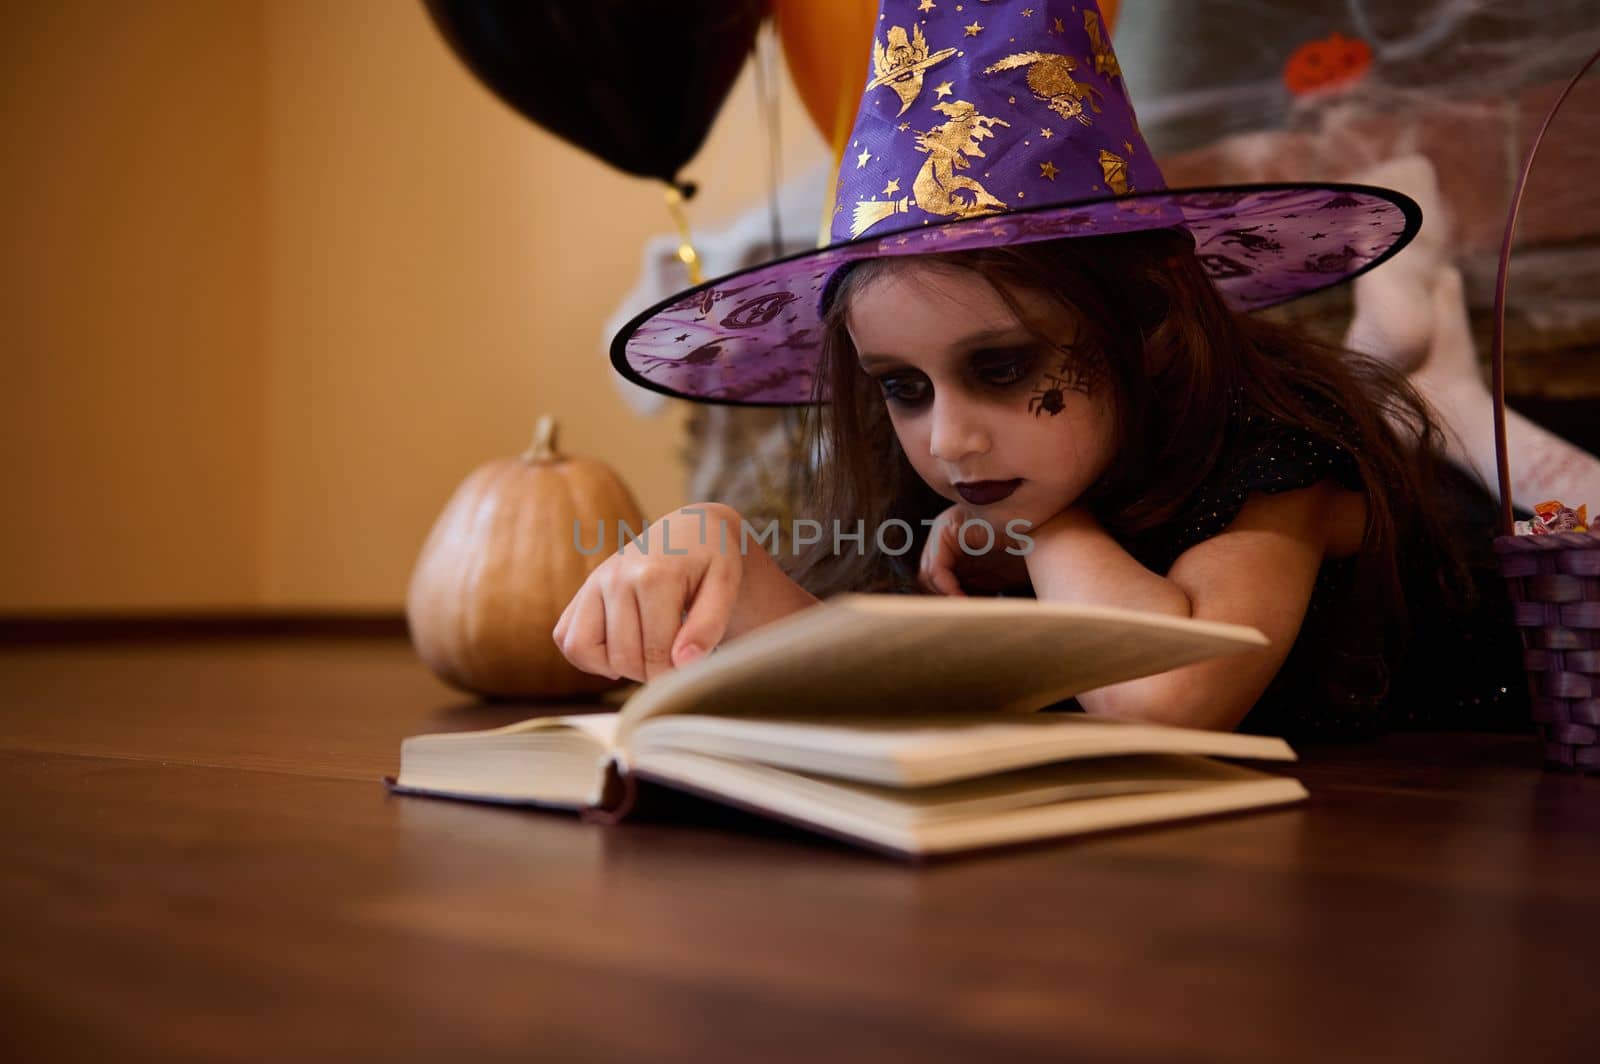 Mischievous little girl with Halloween make-up dressed as a witch, a sorceress in a wizard's hat reading a book of witchcraft and magic spells surrounded by pumpkins and a festive gothic atmosphere